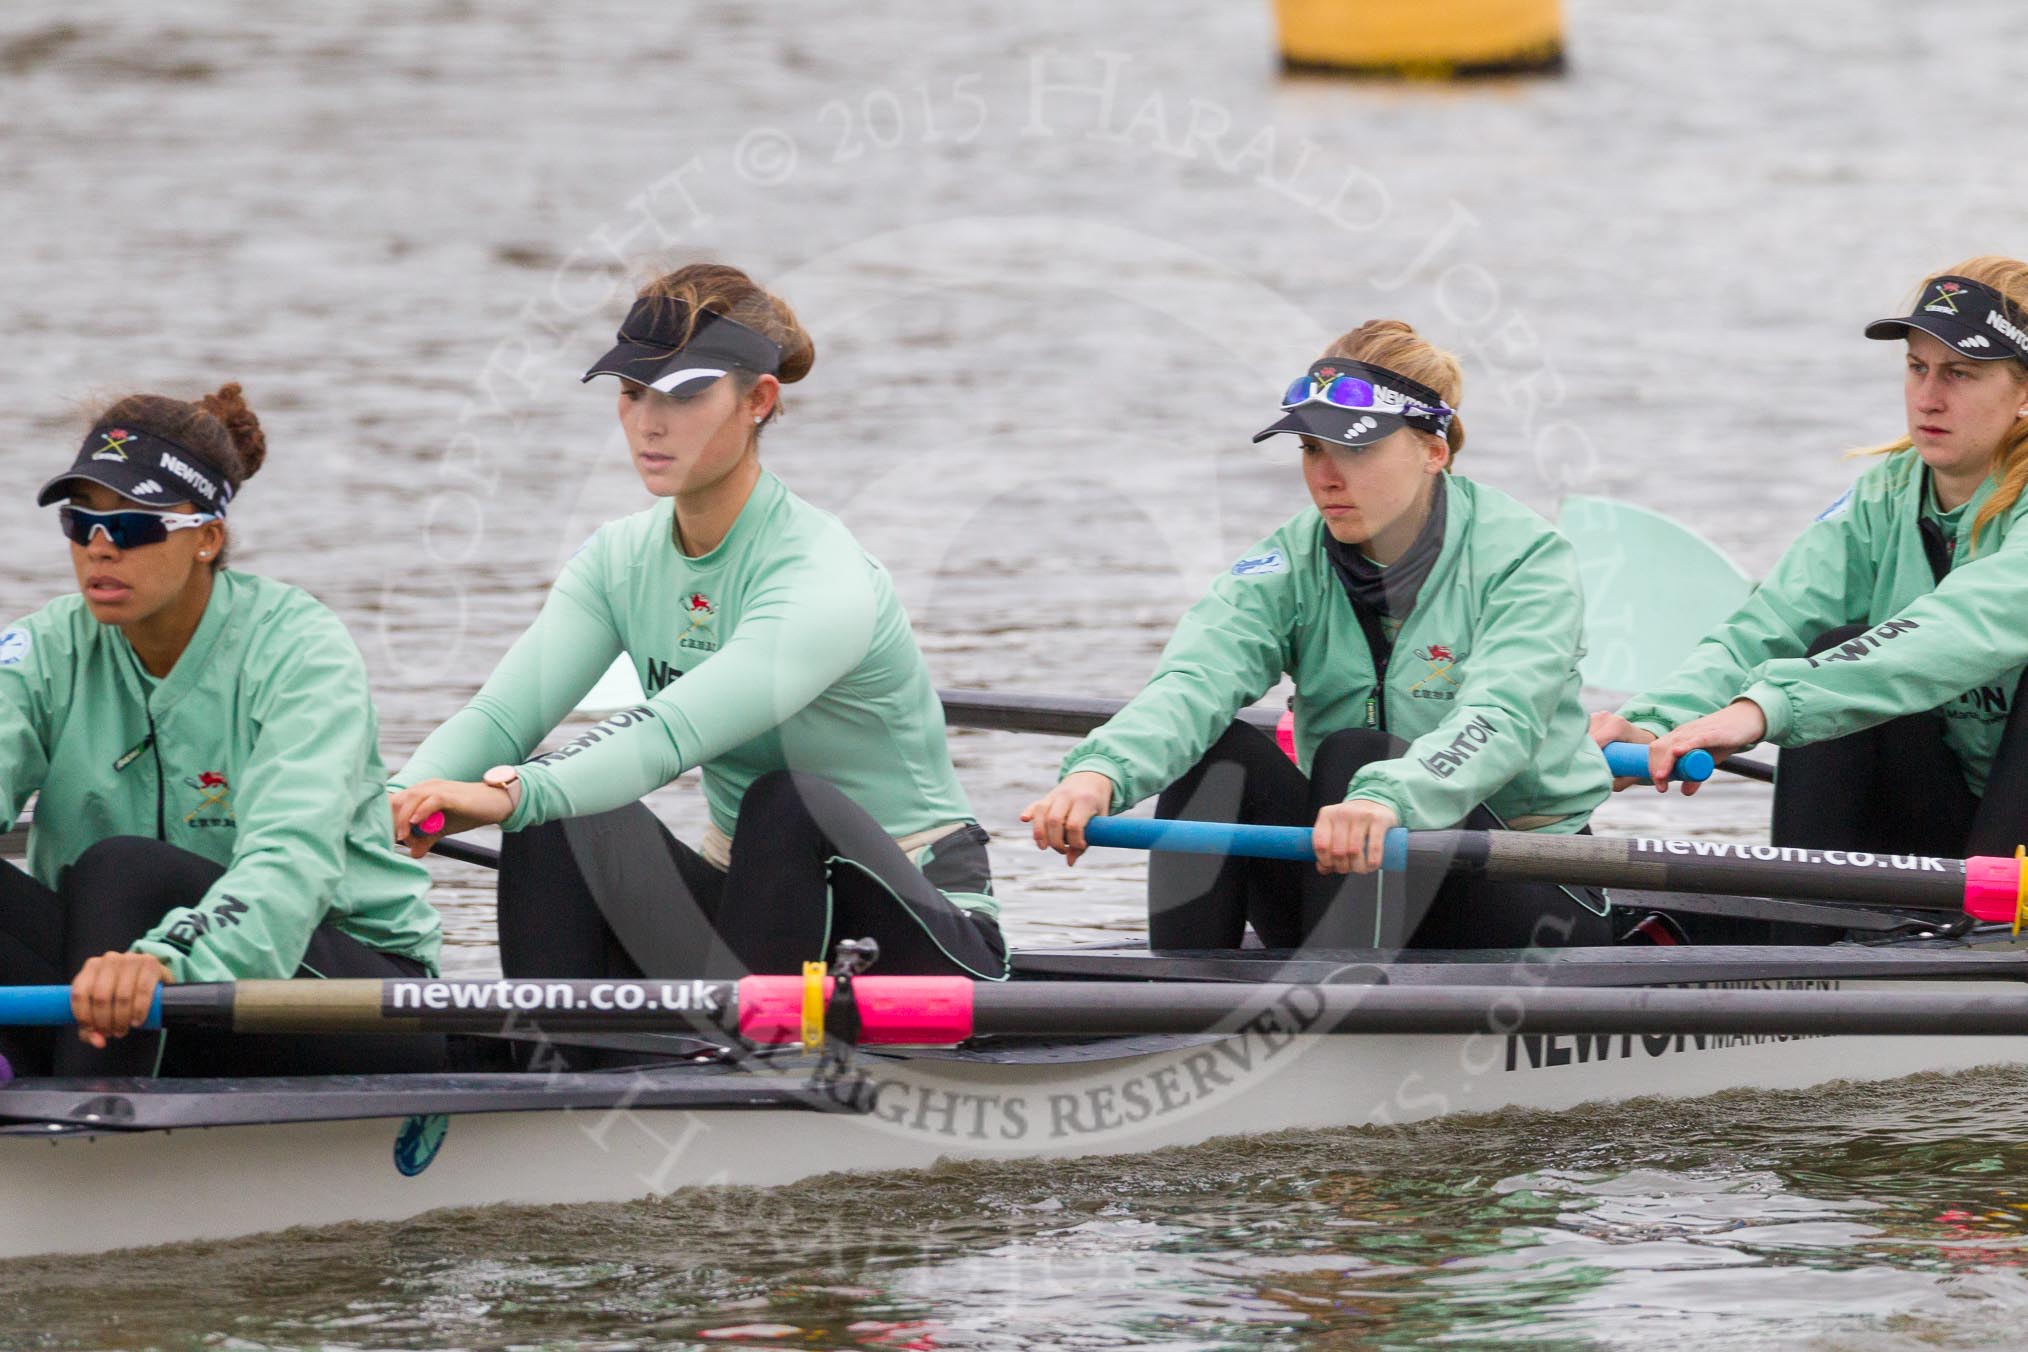 The Boat Race season 2016 - Women's Boat Race Trial Eights (CUWBC, Cambridge): "Tideway", here stroke-Daphne Martschenko, 7-Thea Zabell, 6-Alexandra Wood, 5-Lucy Pike, and 4-Alice Jackson.
River Thames between Putney Bridge and Mortlake,
London SW15,

United Kingdom,
on 10 December 2015 at 10:21, image #27